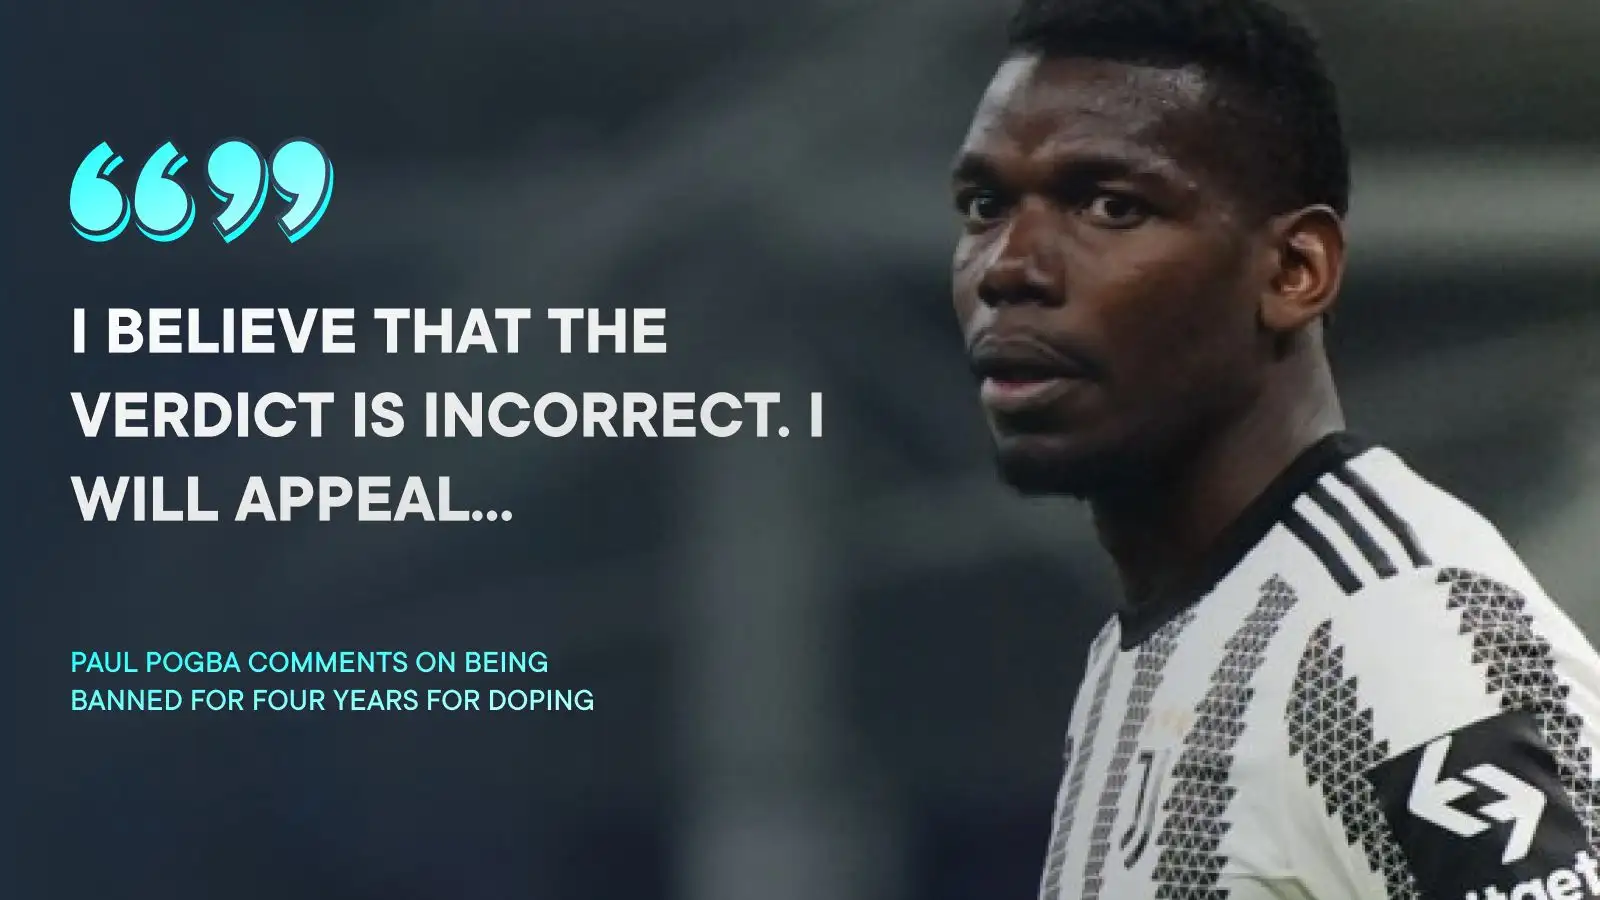 Pogba swaggered grip for doping